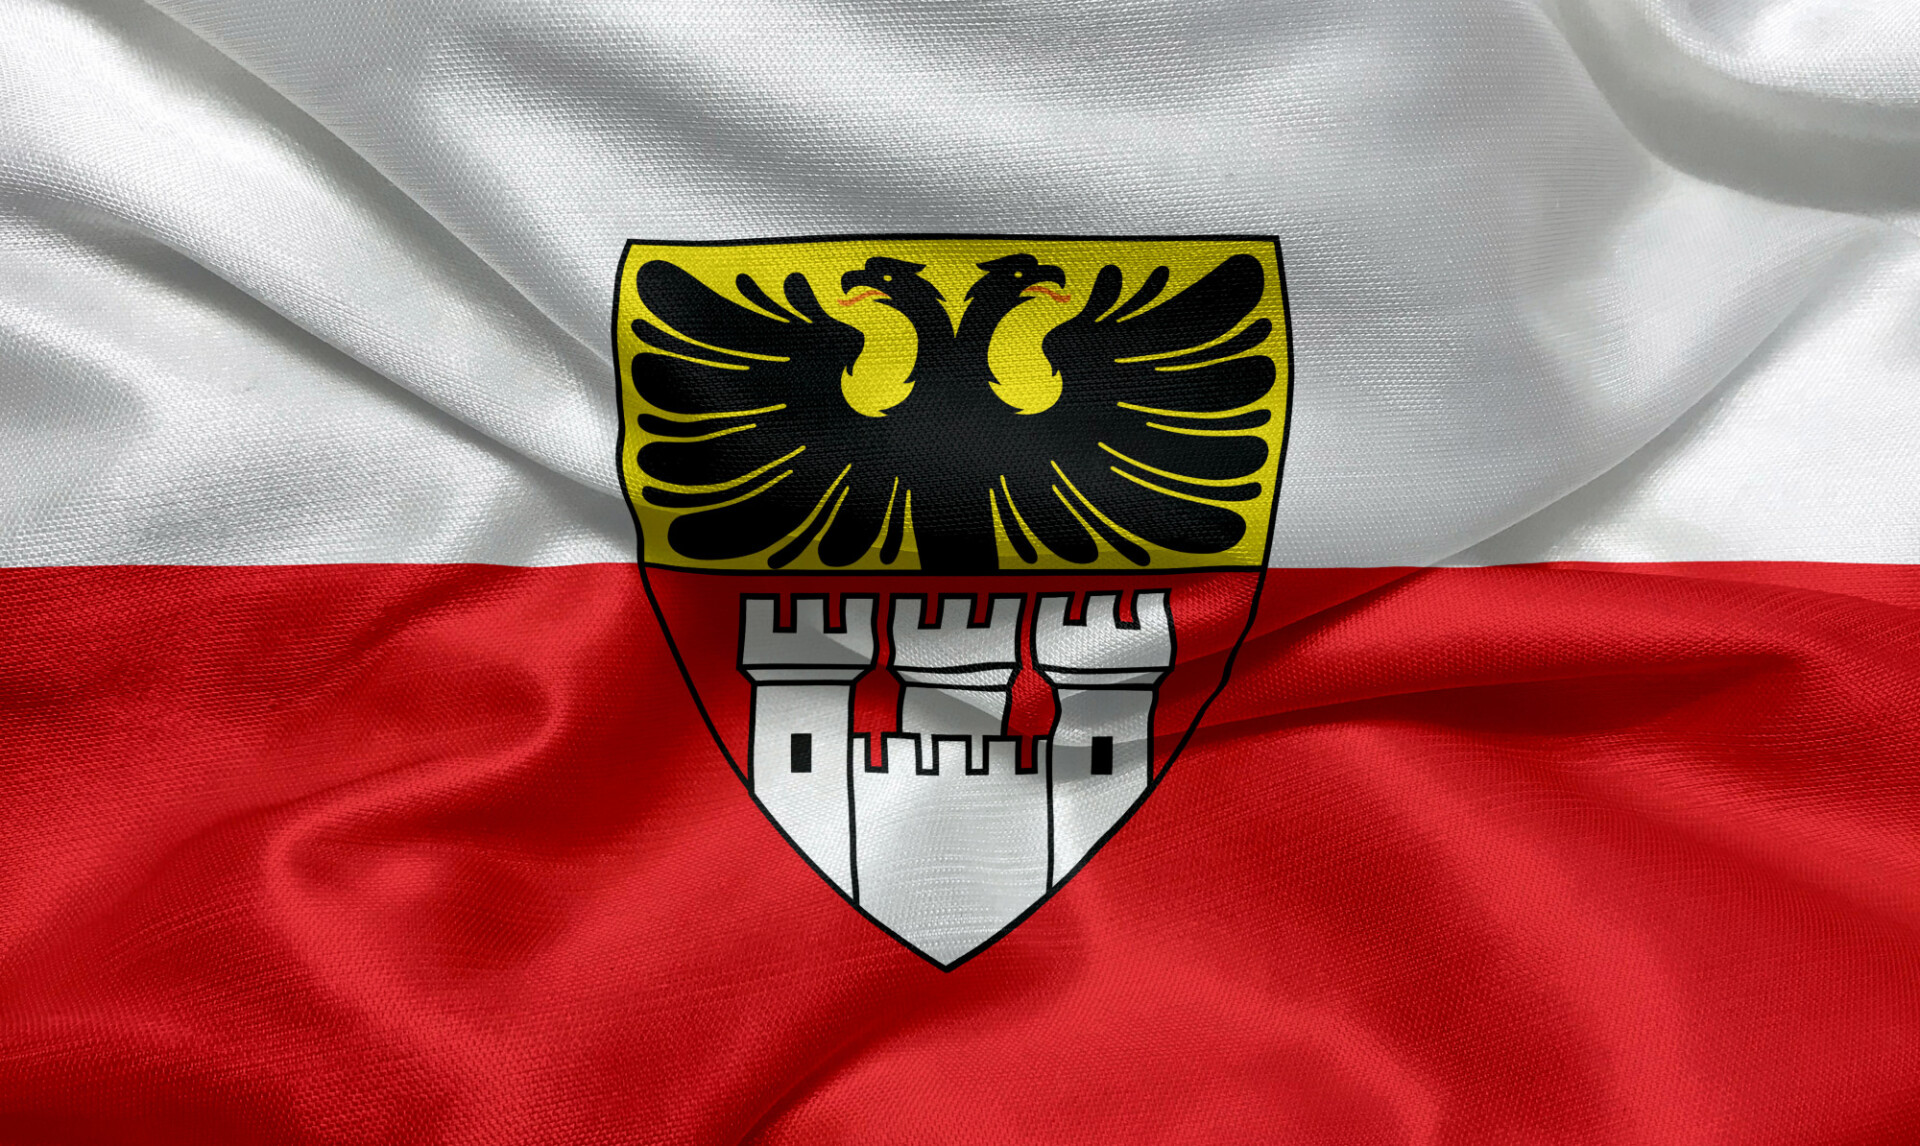 Flag of the city of Duisburg